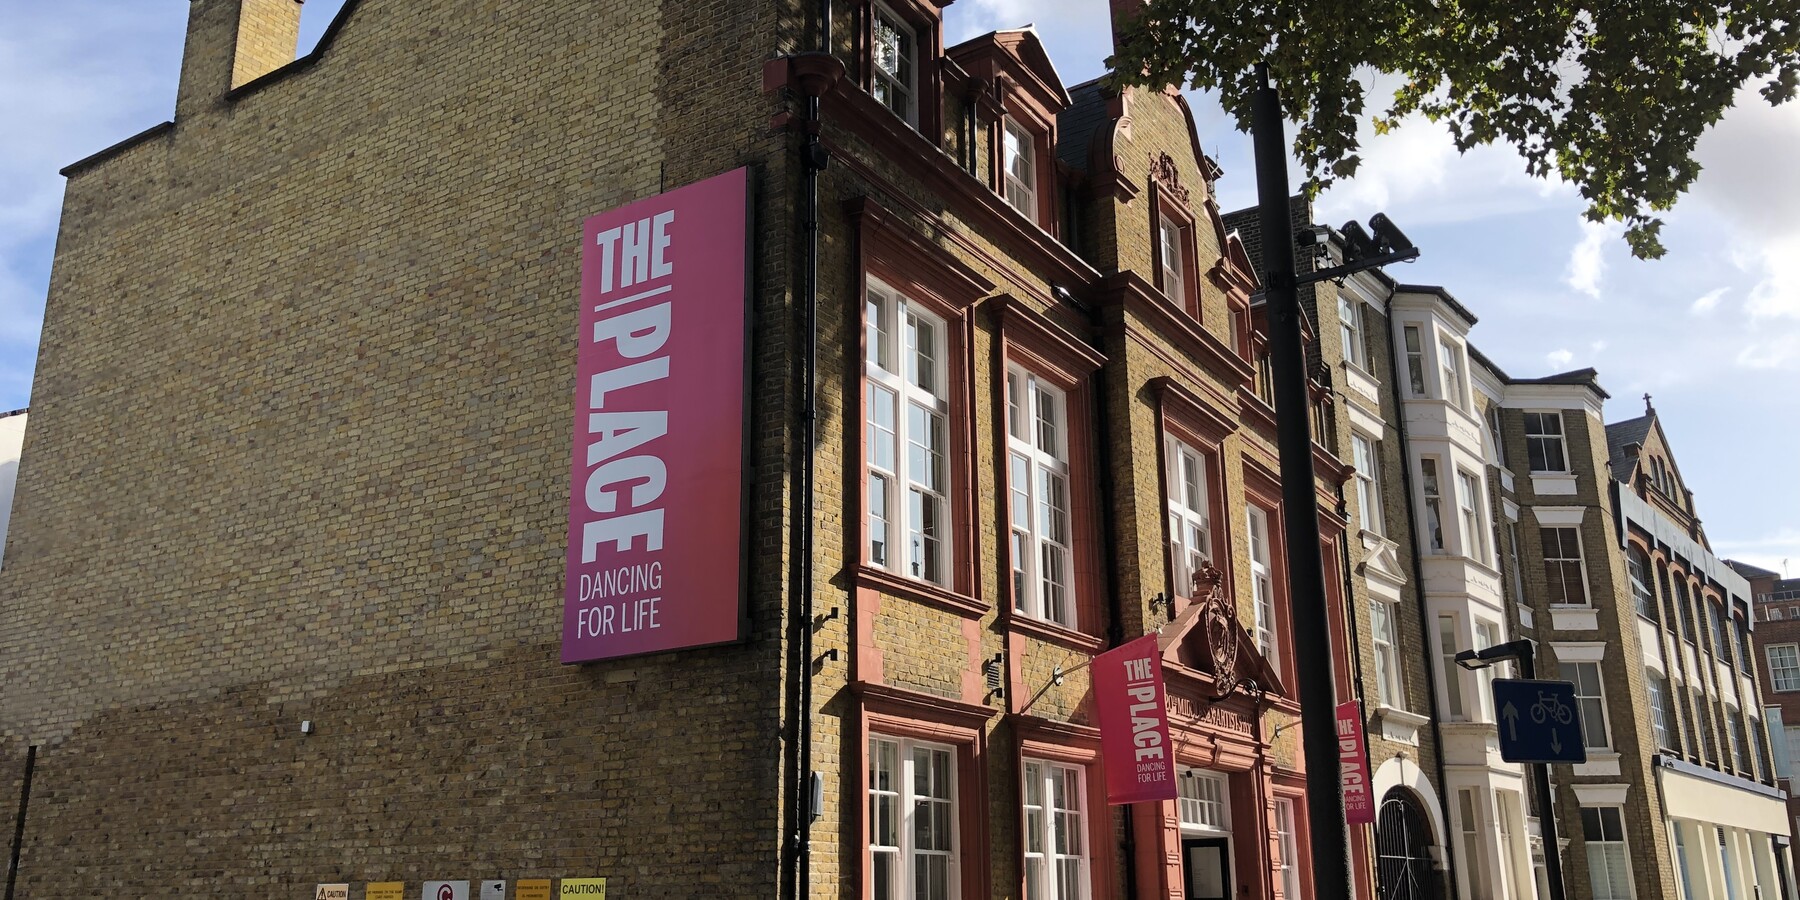 A view of The Place, a venue in London, from the side.